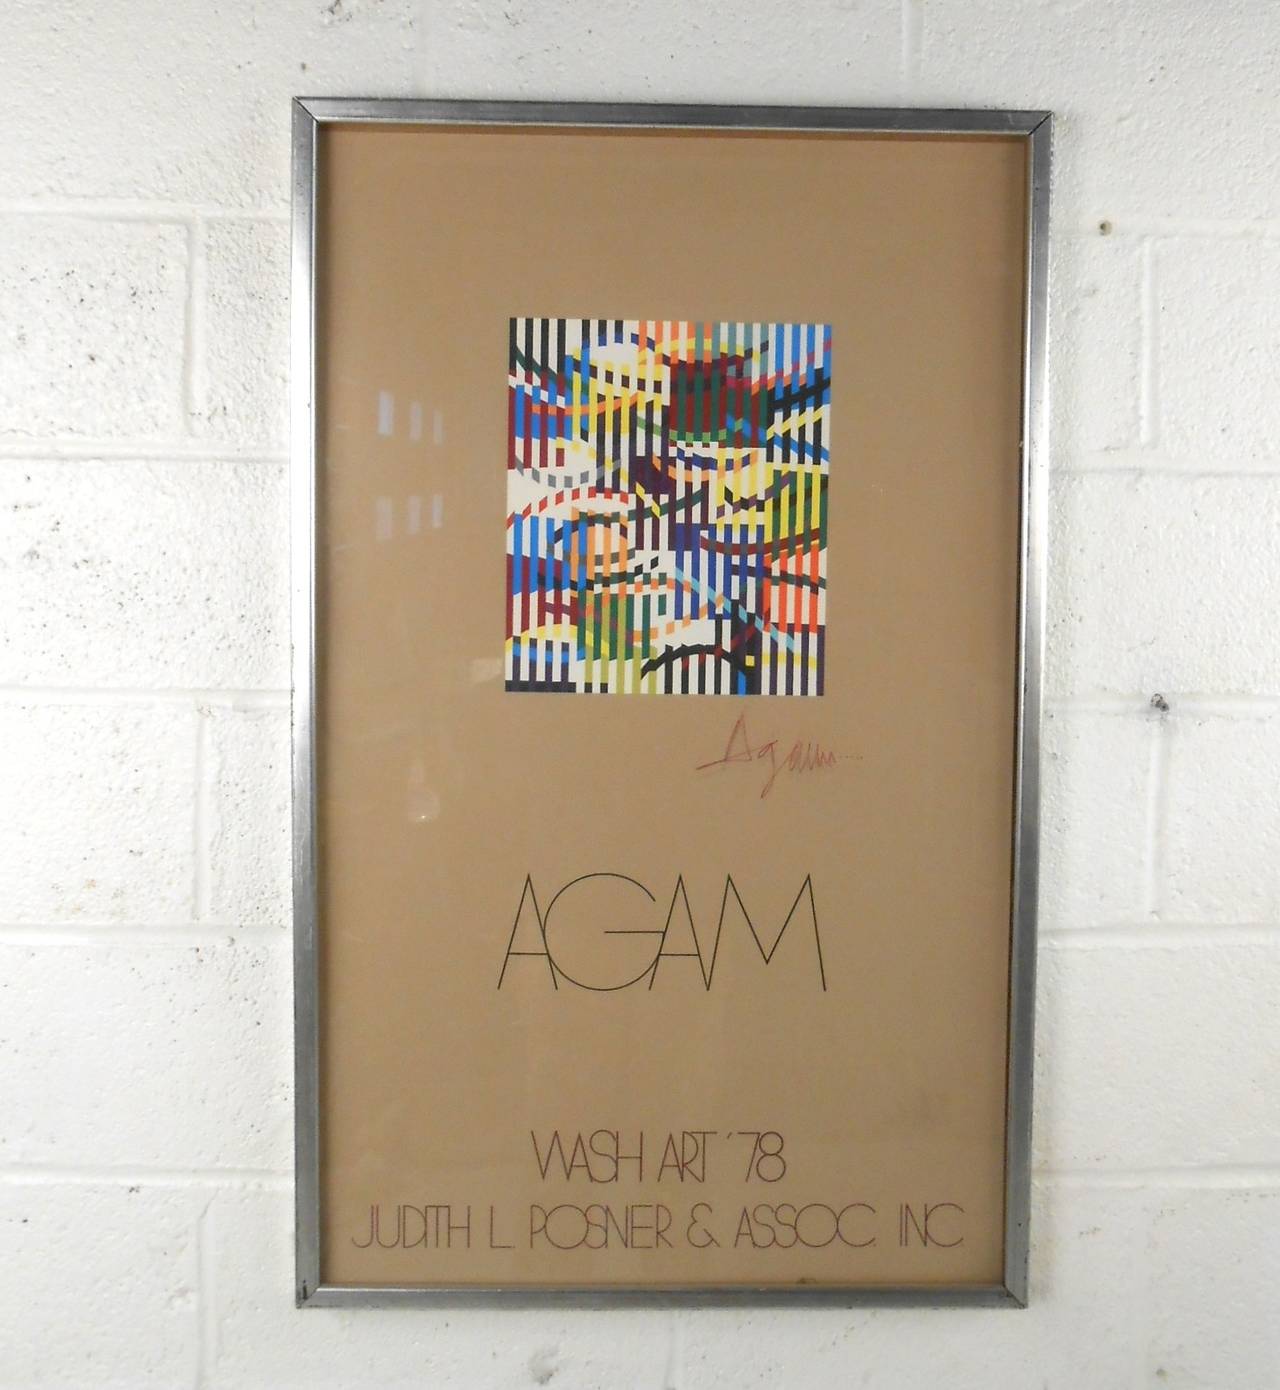 This unique piece by Yaacov Agam adds unique midcentury flair to any wall. Vibrant colors with modern typography make this a wonderful reminder of the midcentury era. Please confirm item location (NY or NJ).